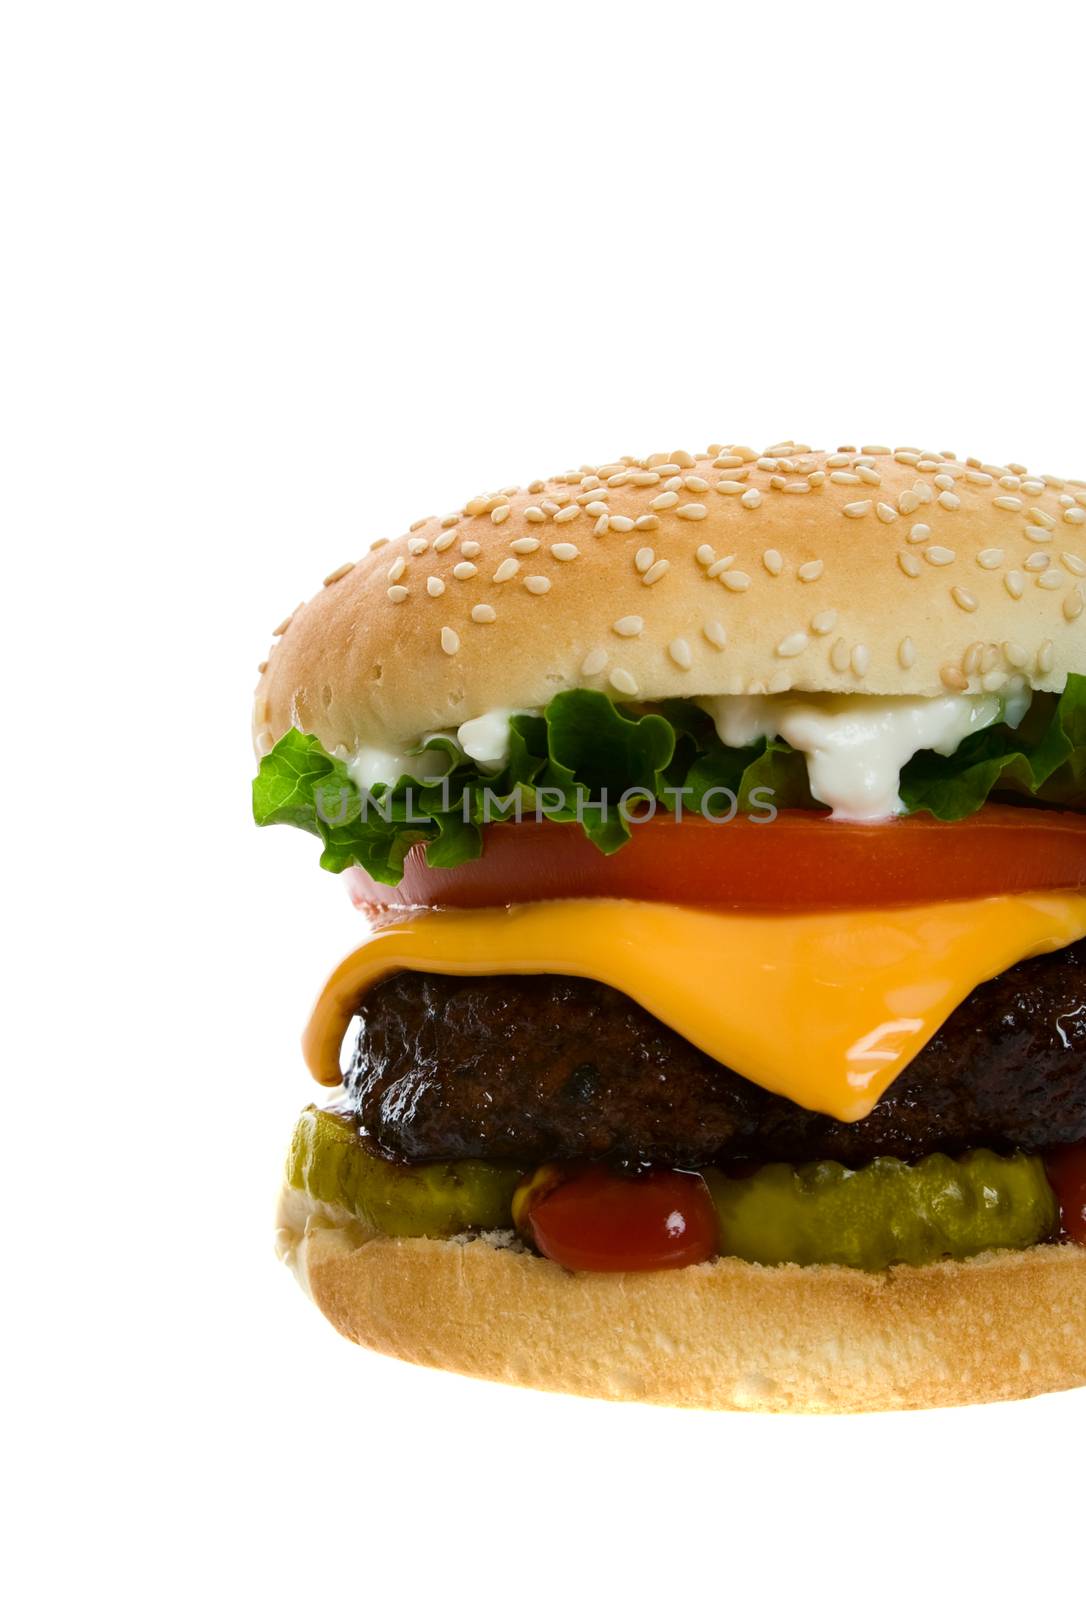 Juicy Angus beef burger topped with cheese, tomatoes & lettuce on a golden sesame seed bun.  Shot on white background.